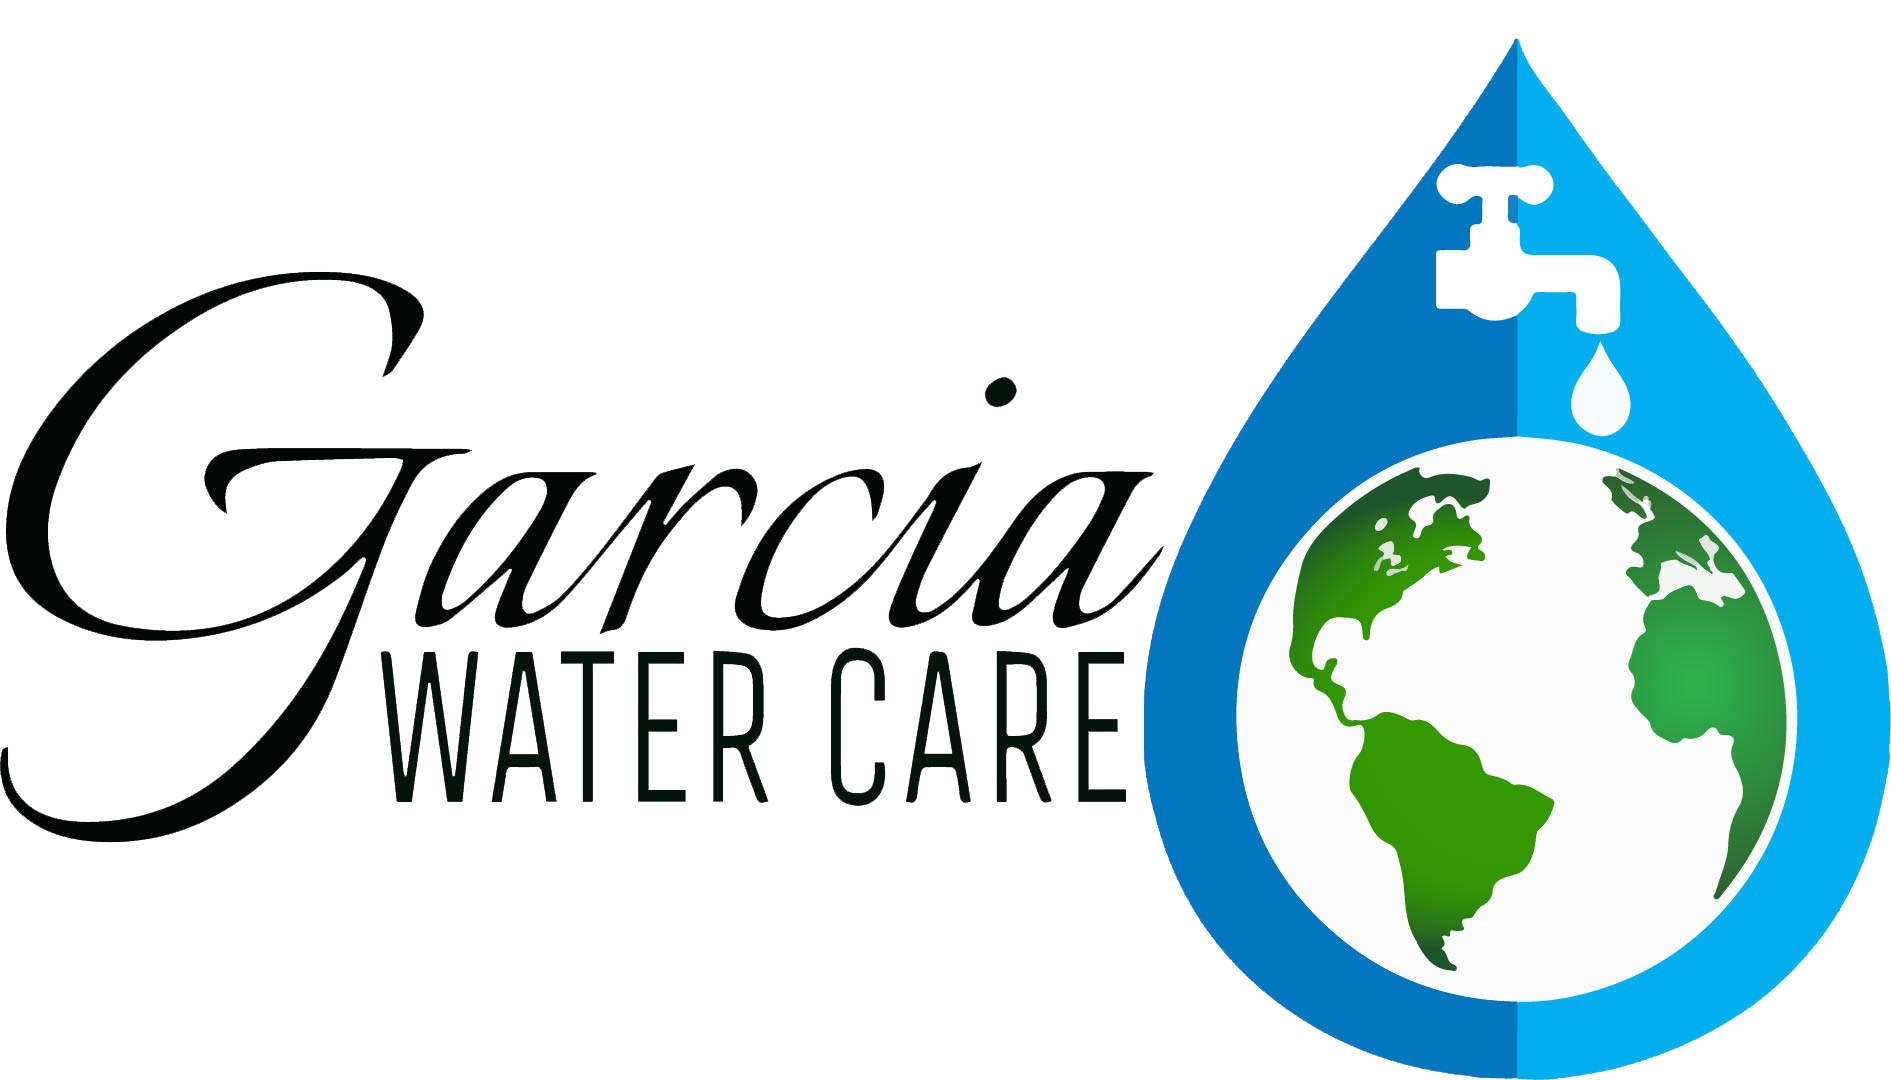 Garcia Water Care is a Puronics-authorized dealership that provides maintenance and service for any water filtration system.